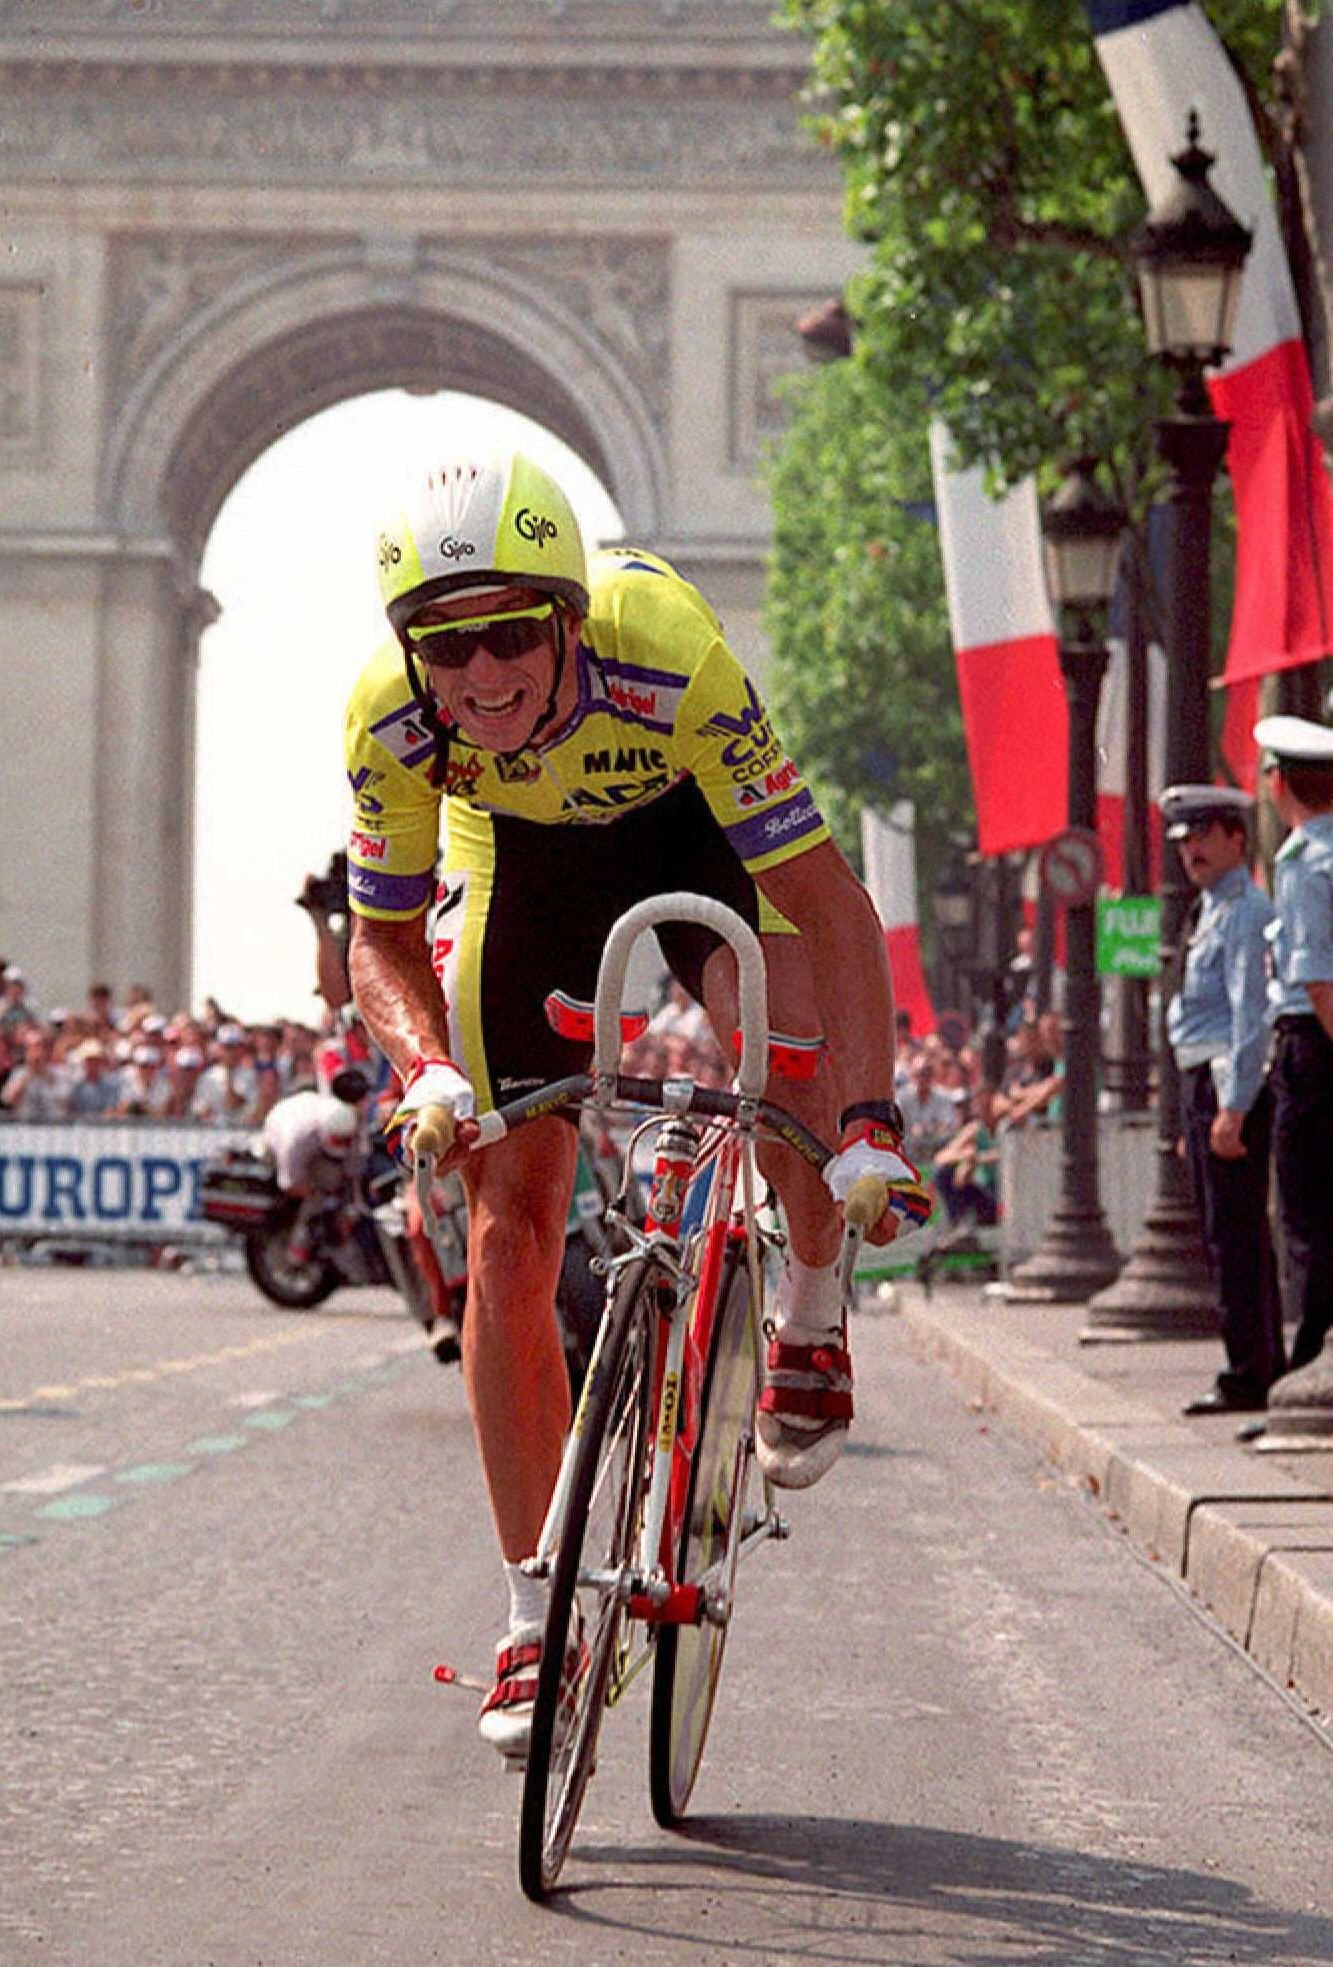 greg-lemond-of-the-us-rides-on-the-champs-elysees-in-a-23-news-photo-51550912-1559322597.jpeg